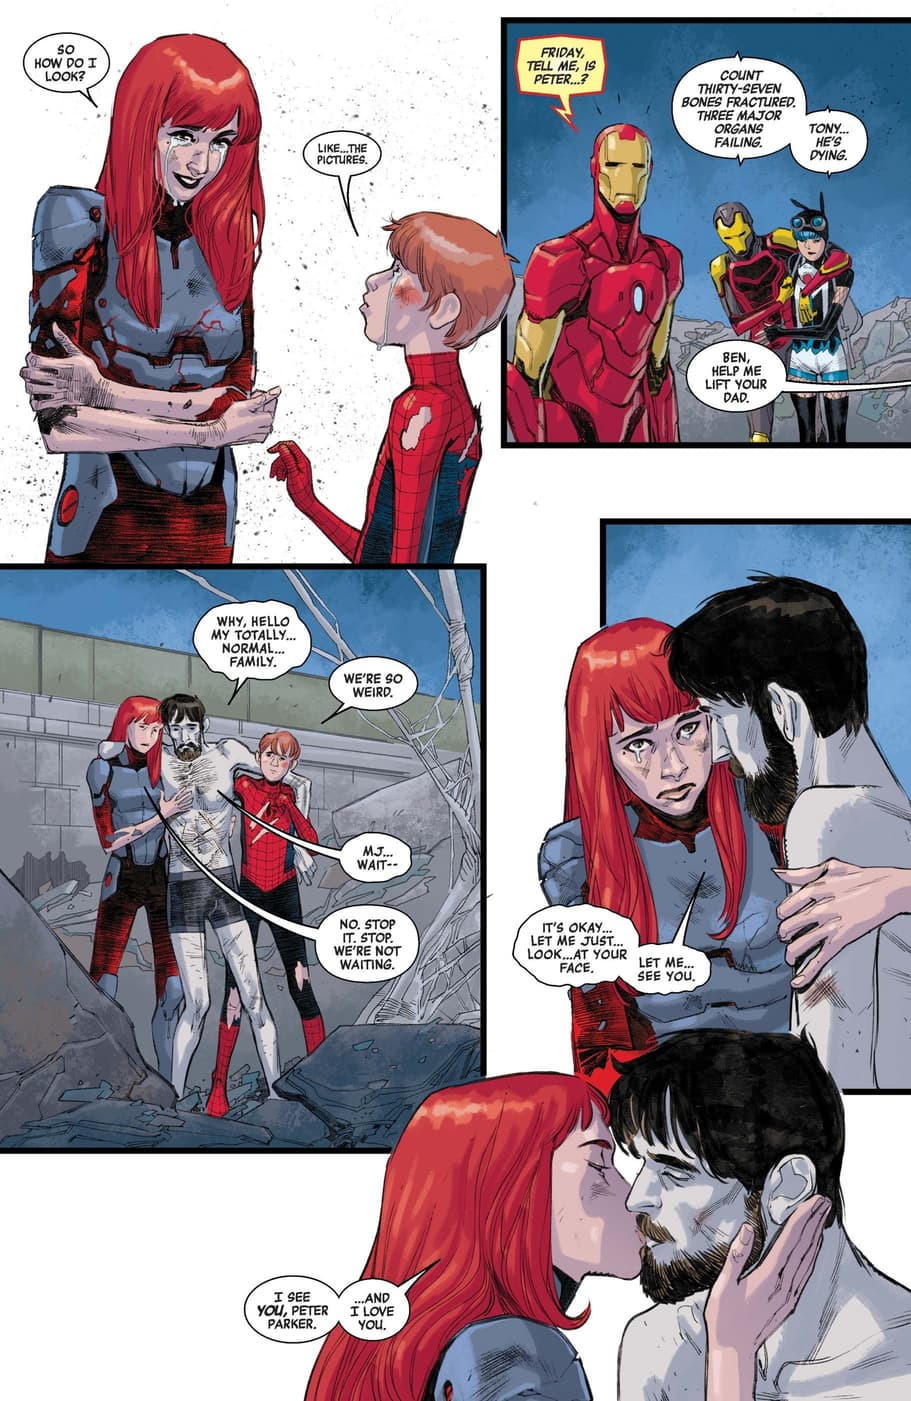 A Spider-Family reunited in SPIDER-MAN (2019) #5